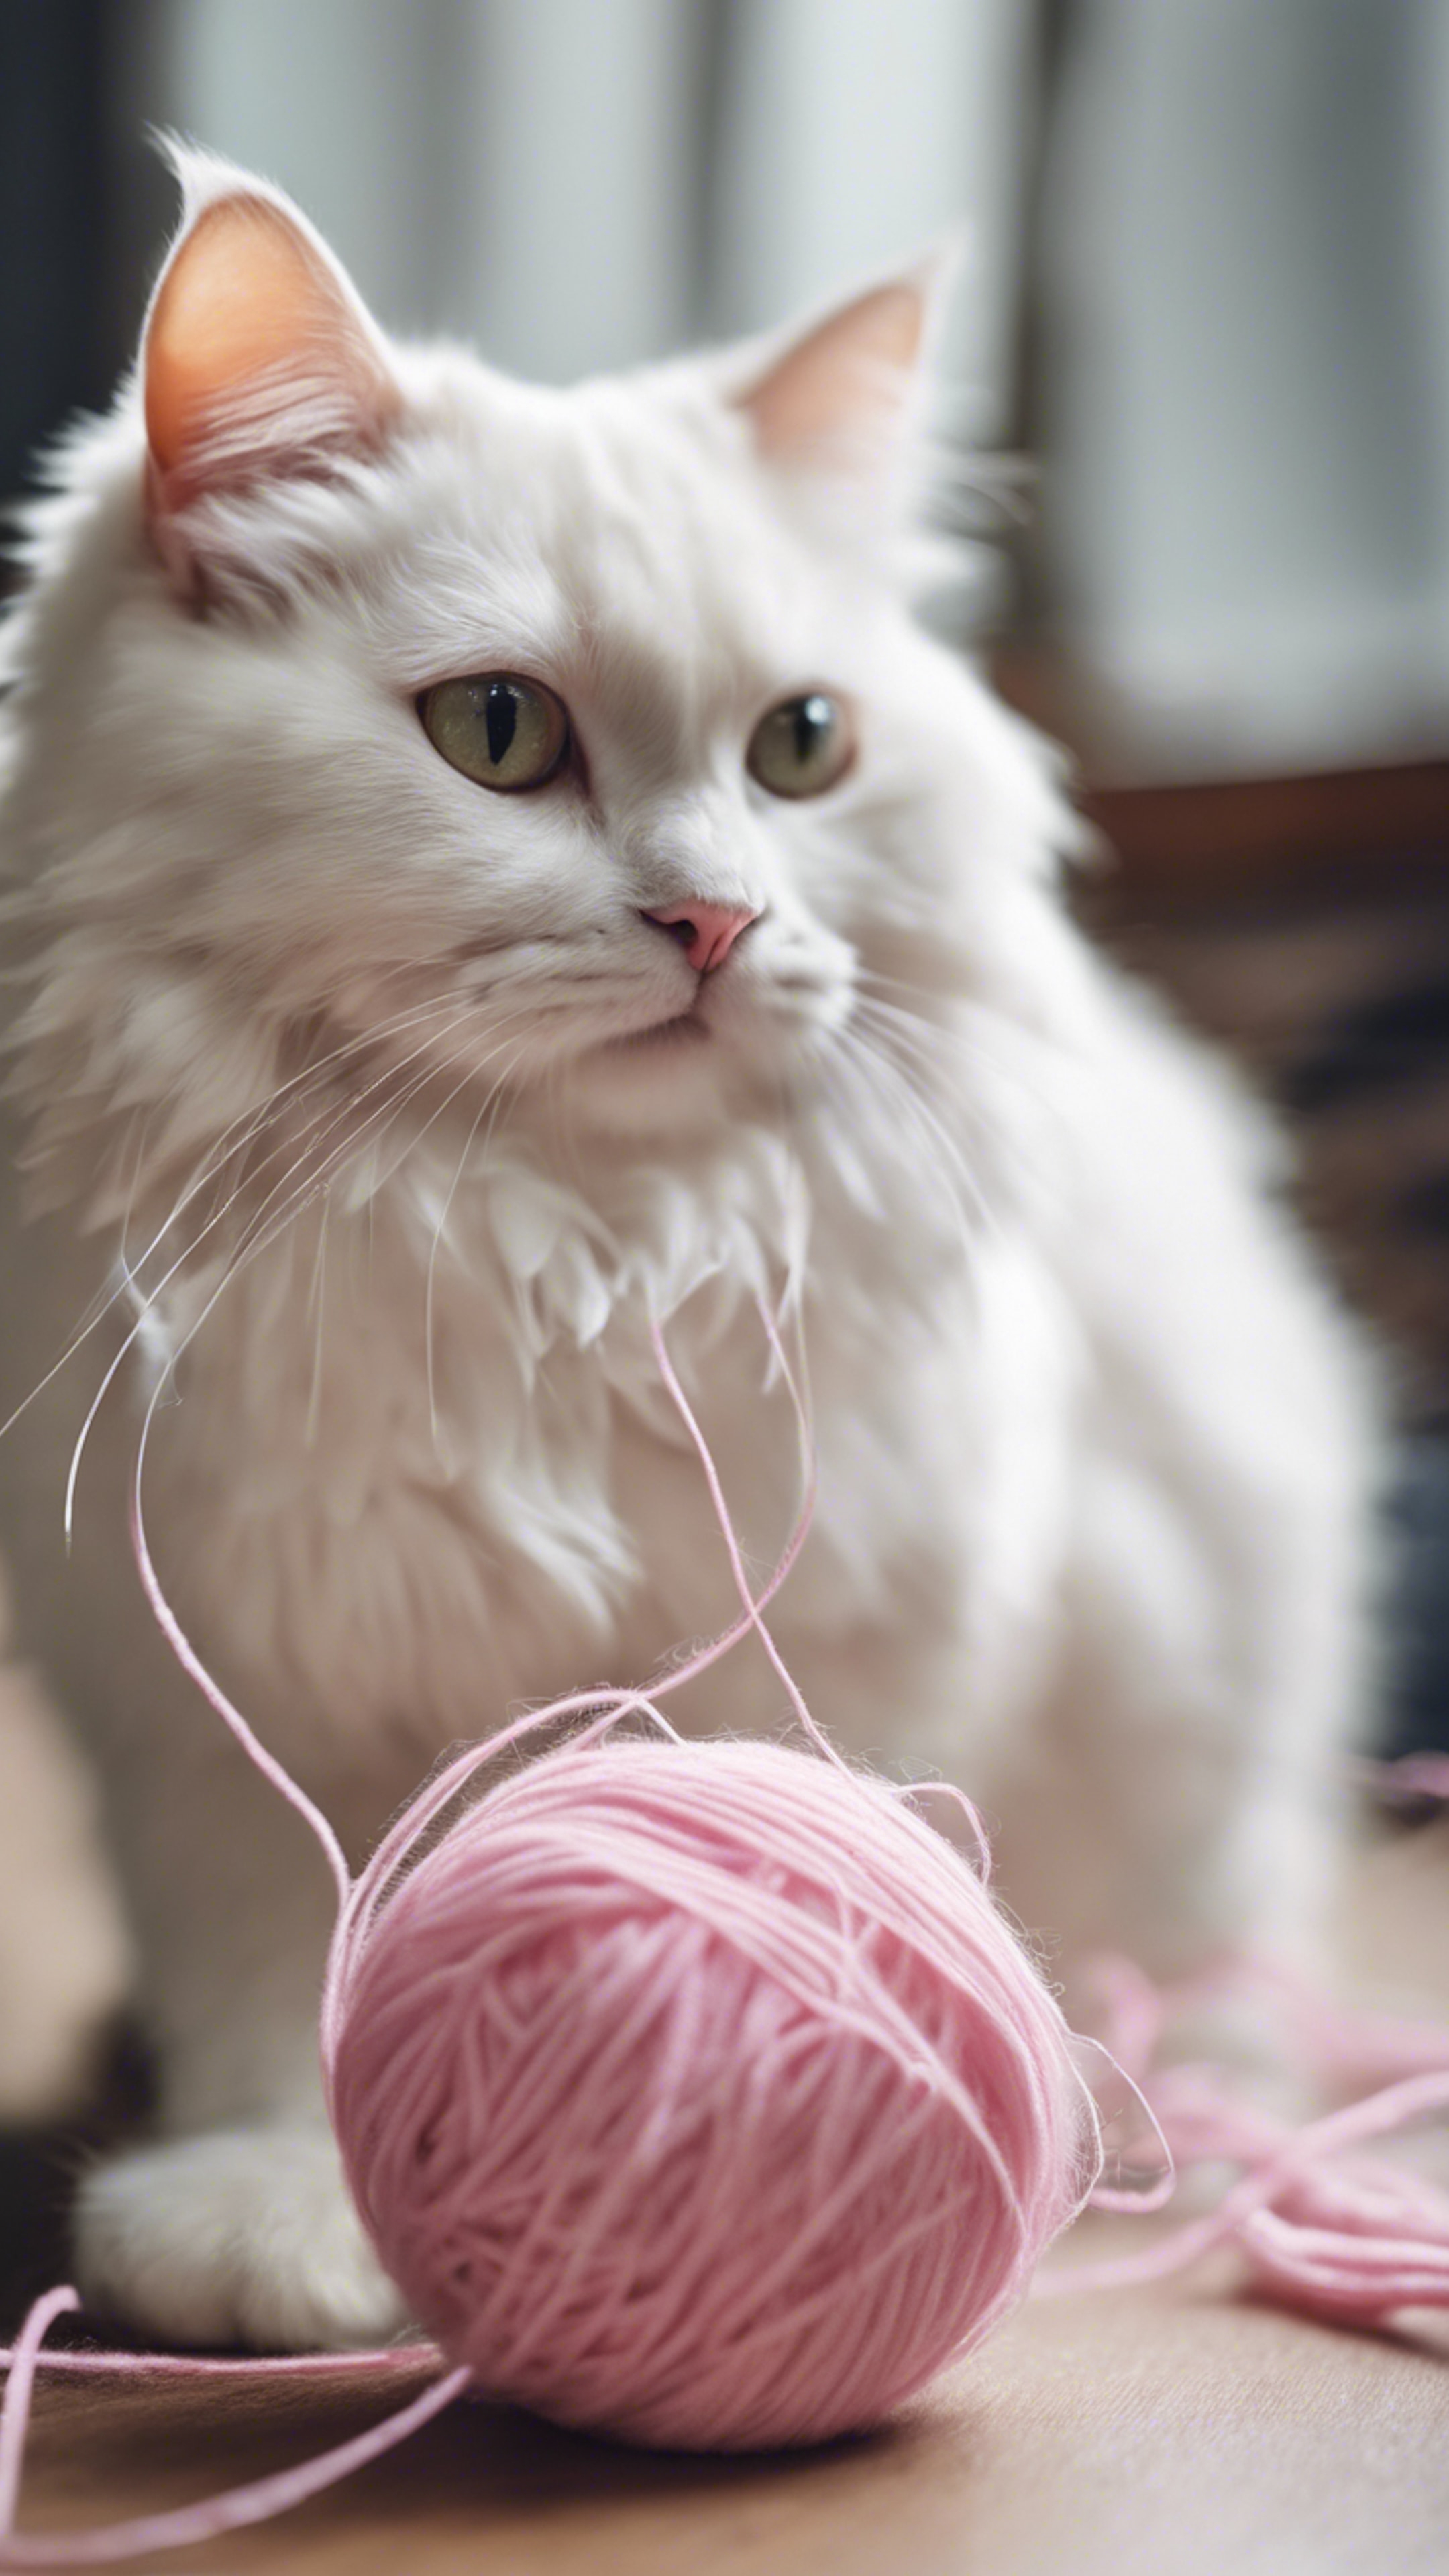 An adorable white cat, fluff all around, playing with a pink ball of yarn. کاغذ دیواری[2f9056787526421e963d]